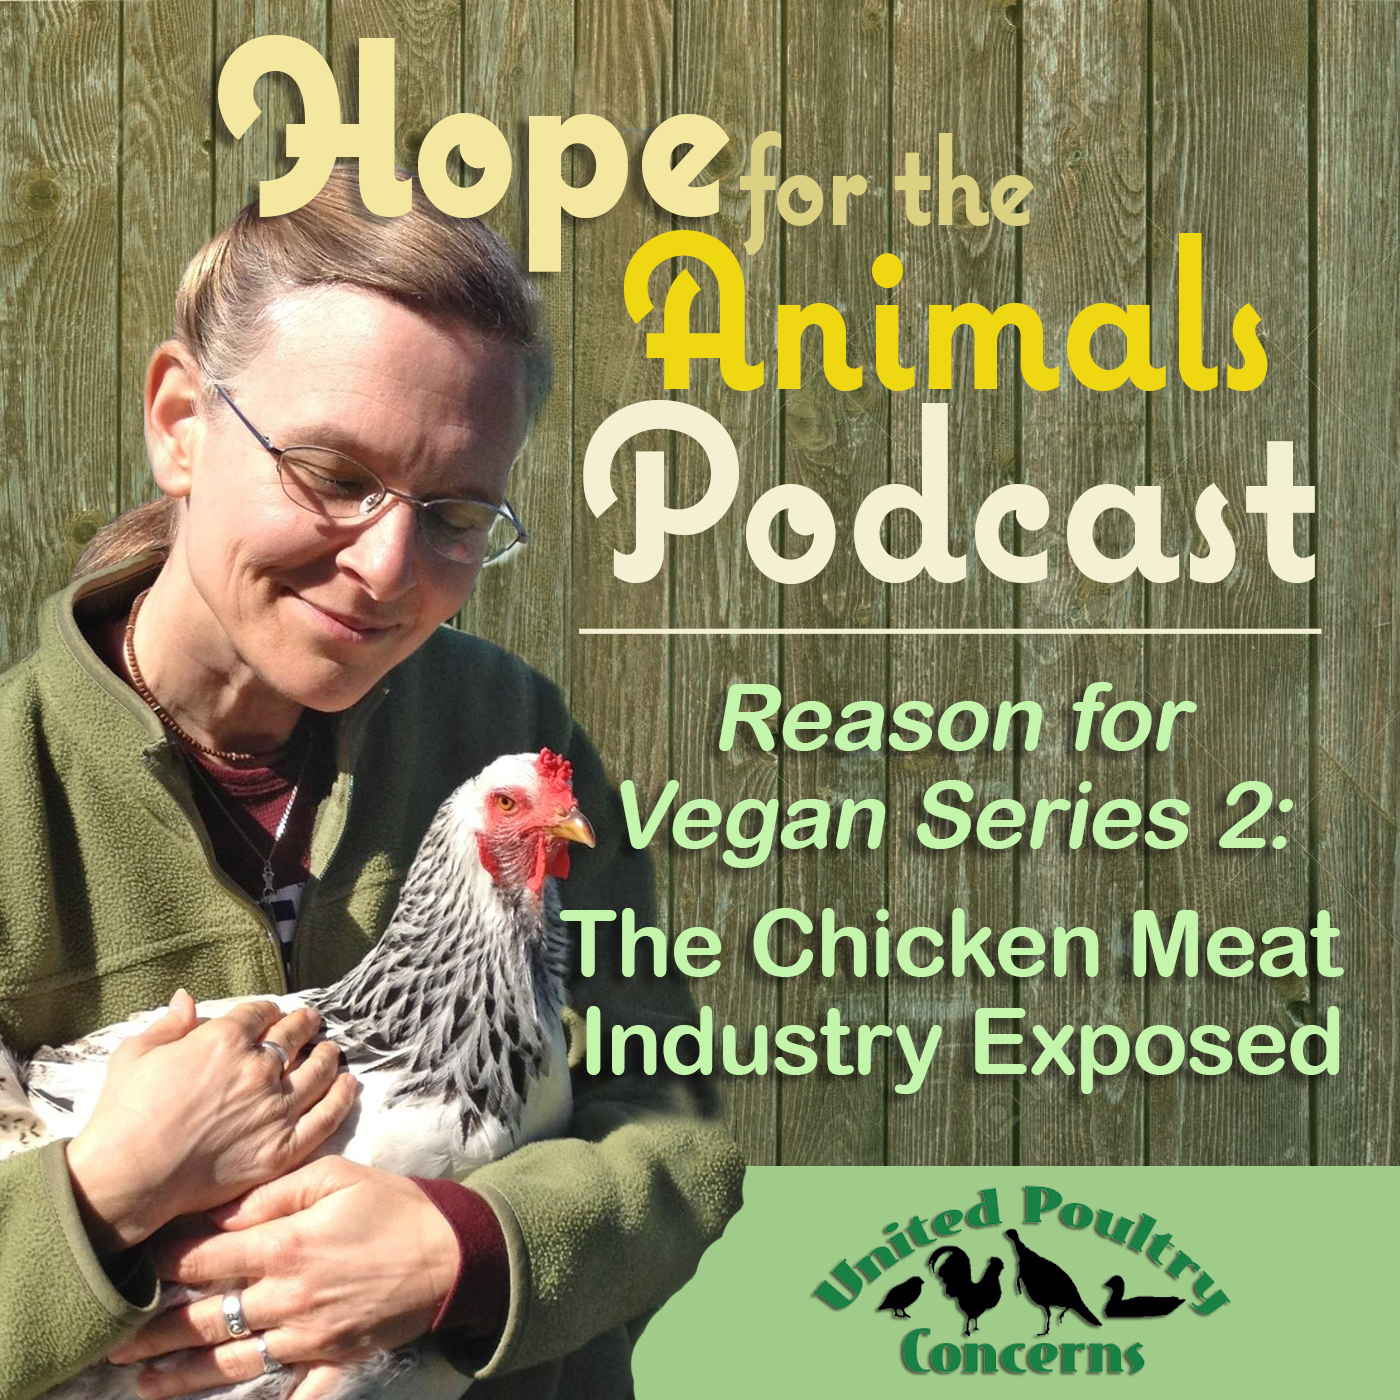 Reason for Vegan Series 2: The Chicken Meat Industry Exposed